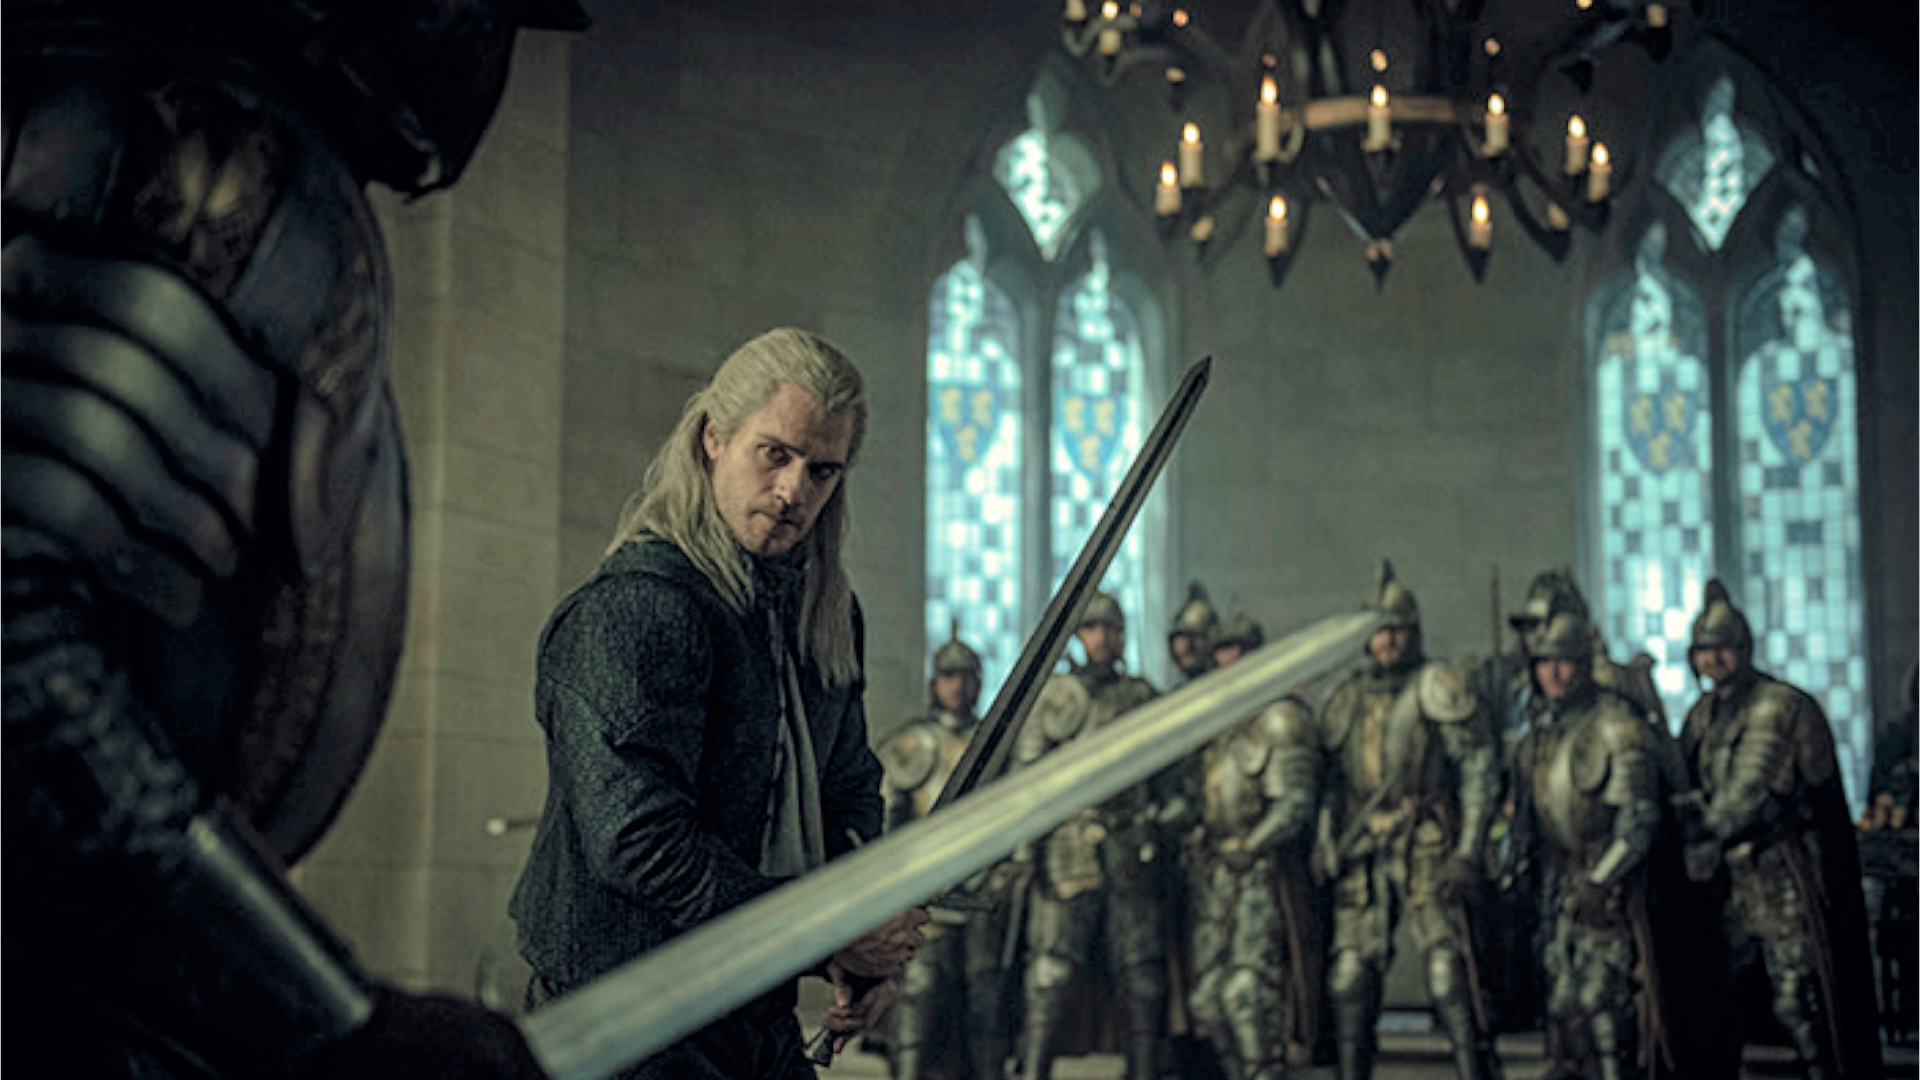 Geralt holding a sword ready to fight in the hall of a castle